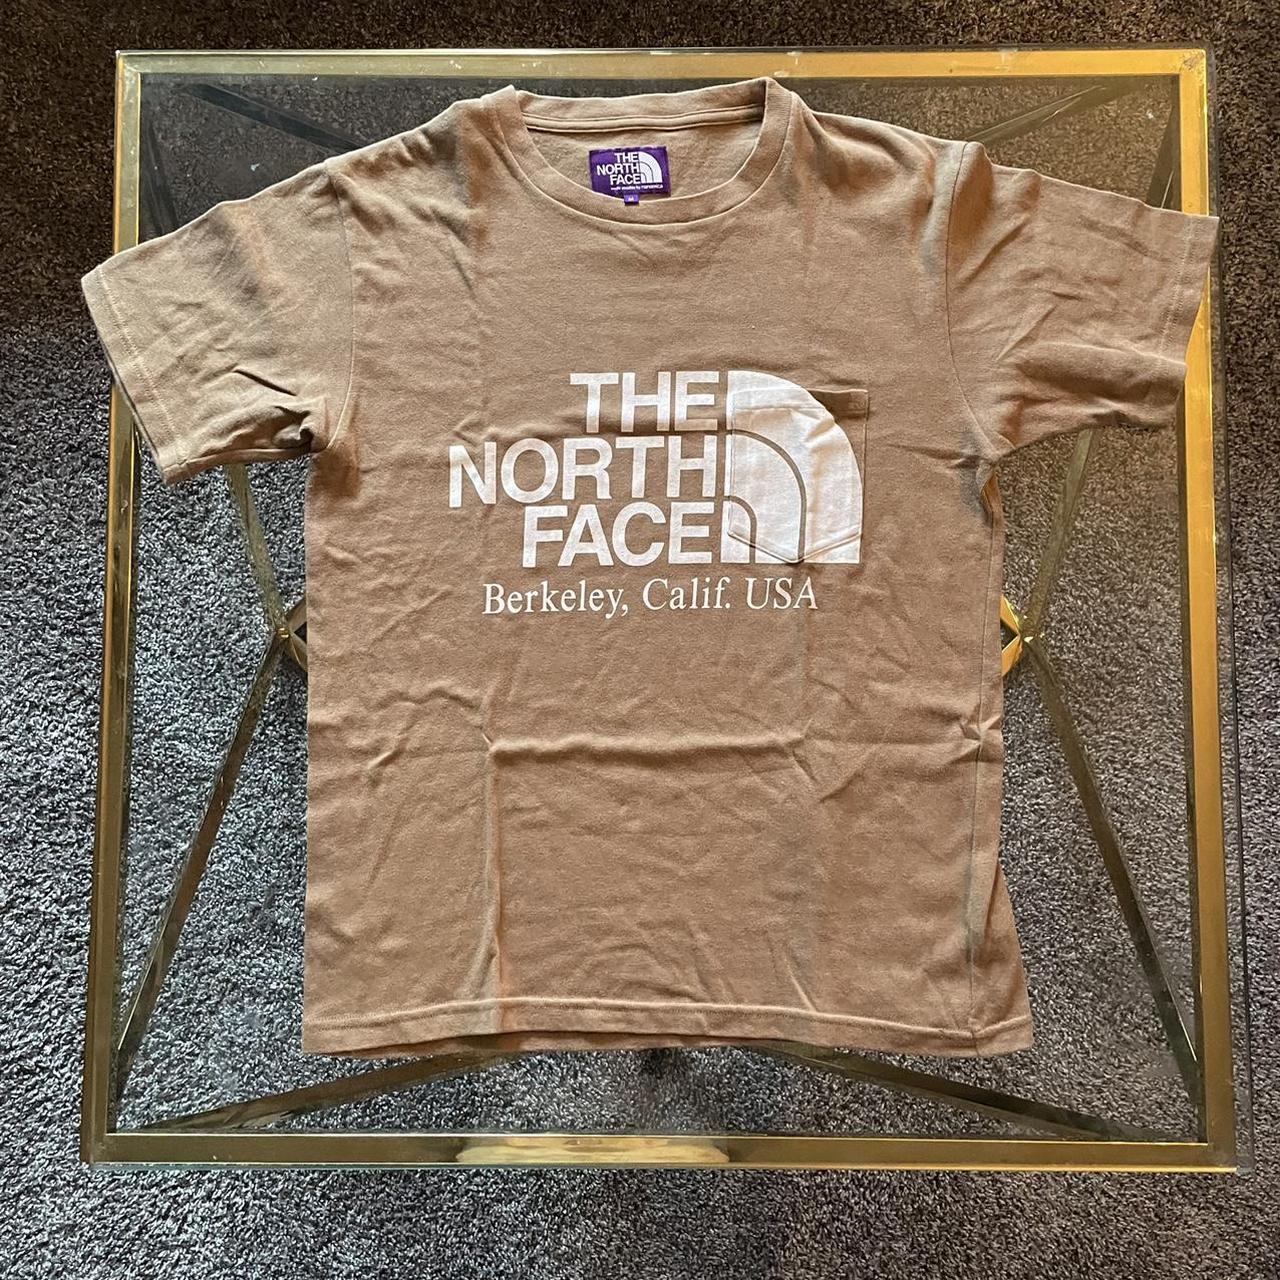 The North Face Purple Label Men's Tan and Brown T-shirt